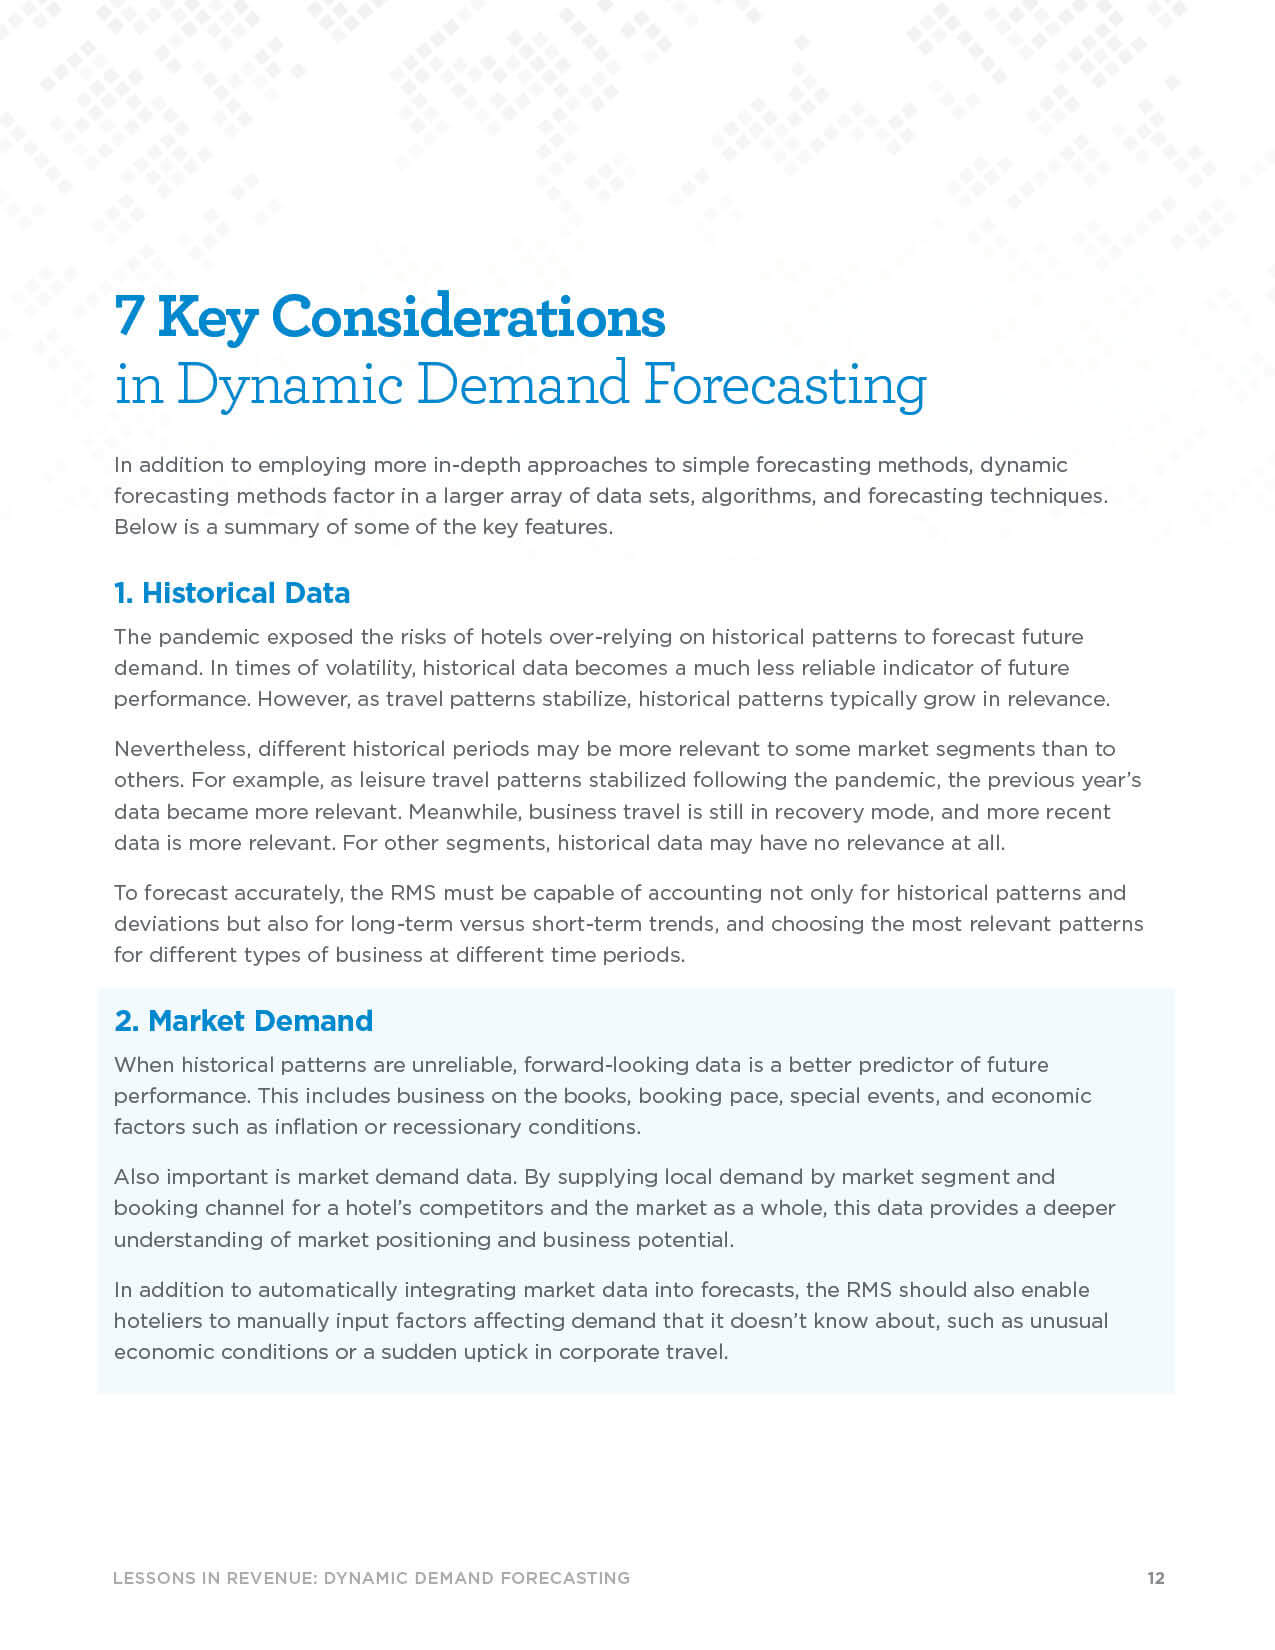 Page 12 - 7 Key Considerations in Dynamic Demand Forecasting